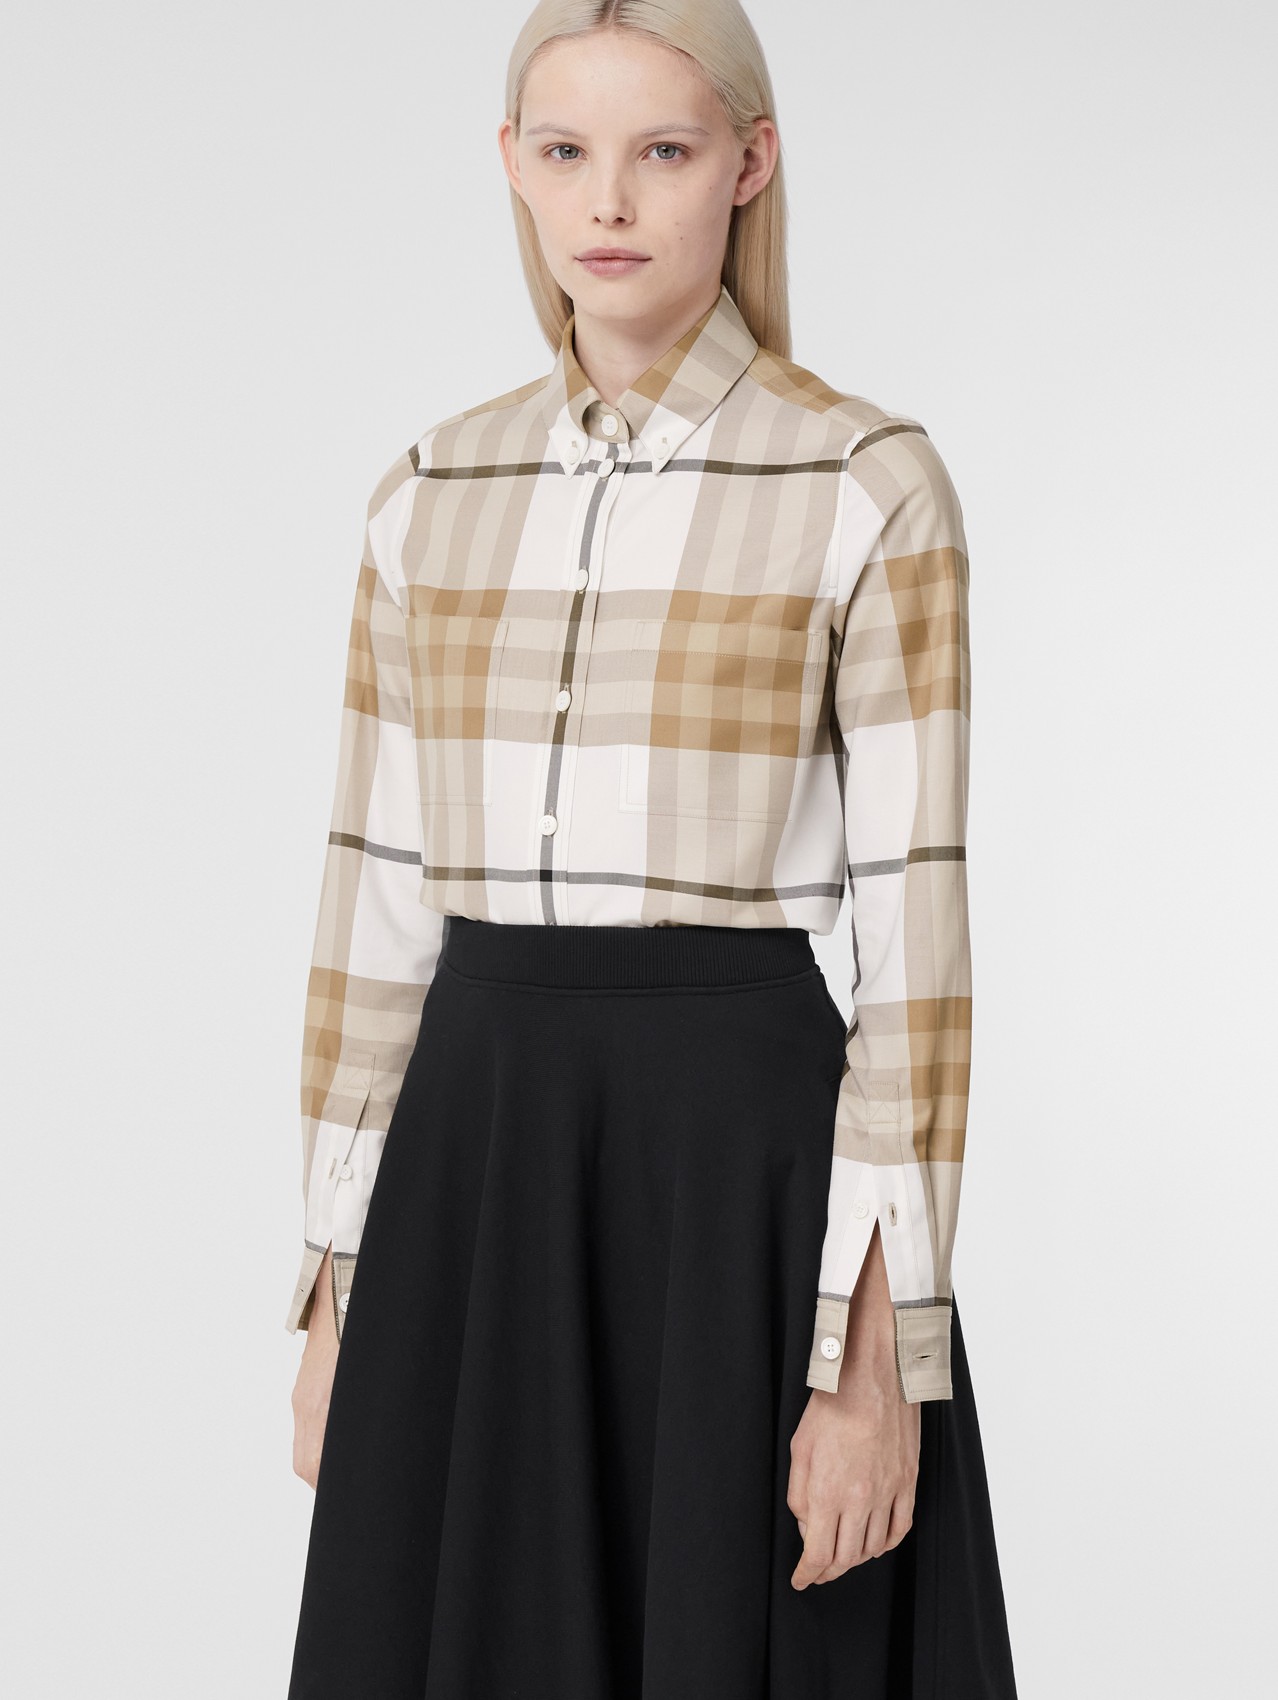 Blouse BURBERRY Other blue Women Clothing Burberry Women Tops Burberry Women Blouses & Shirts  Burberry Women Blouses Burberry Women Blouses Burberry Women 